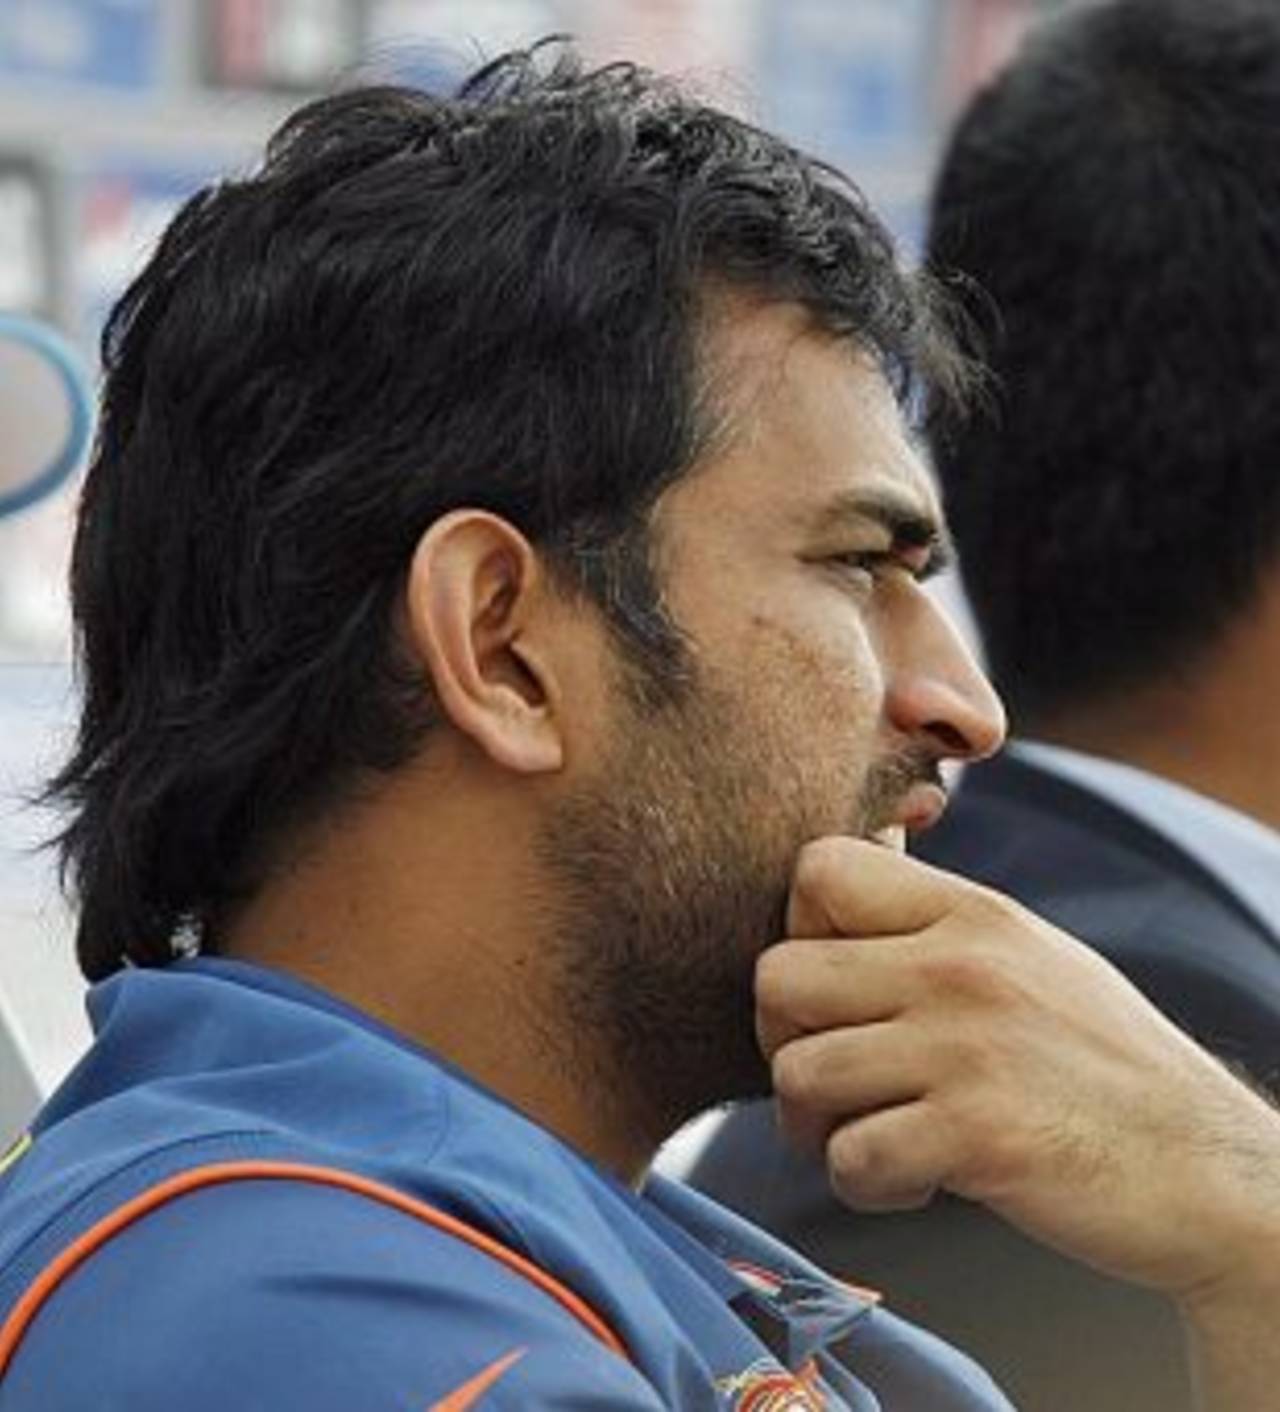 MS Dhoni wears a worried look, England v India, ICC World Twenty20 Super Eights, Lord's, June 14, 2009